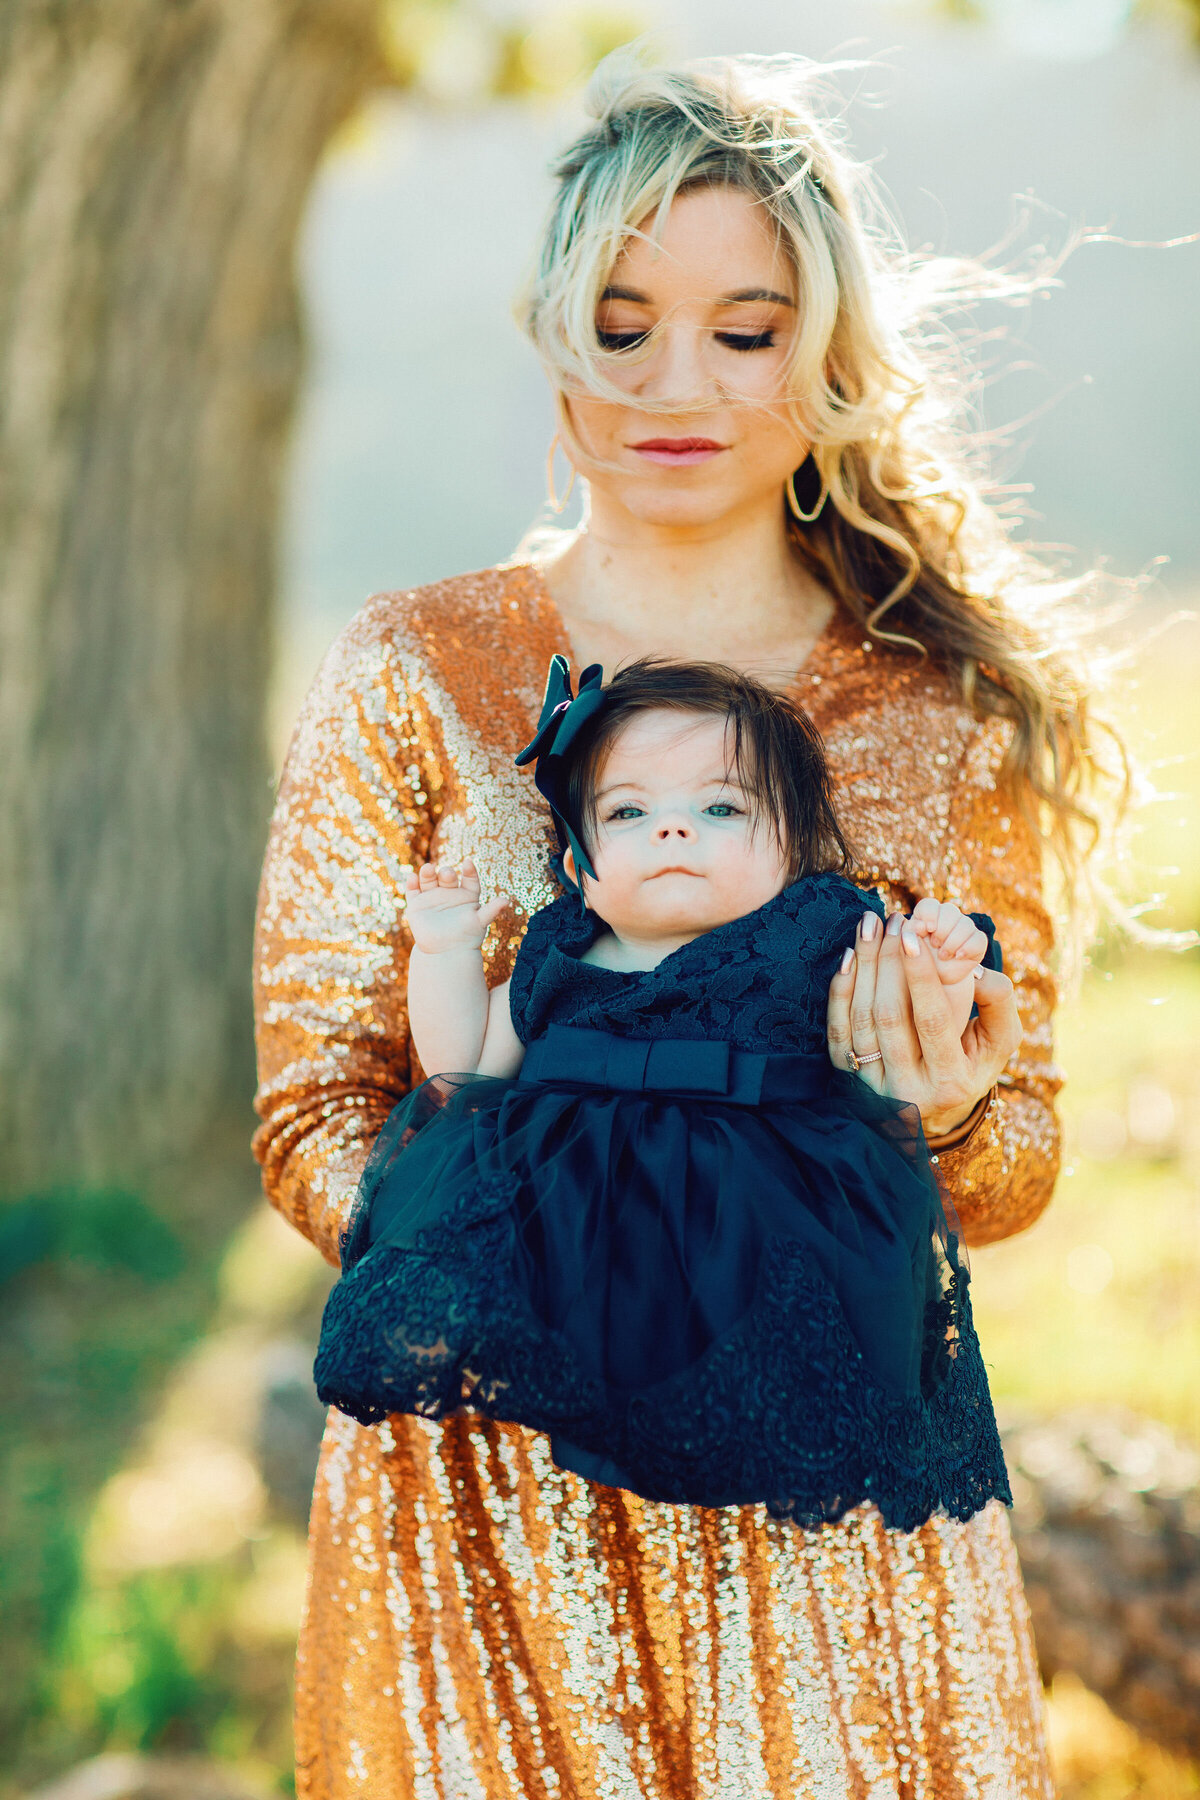 Family Portrait Photo Of Mother In Orange Dress Carrying Her Baby In Blue Dress Los Angeles